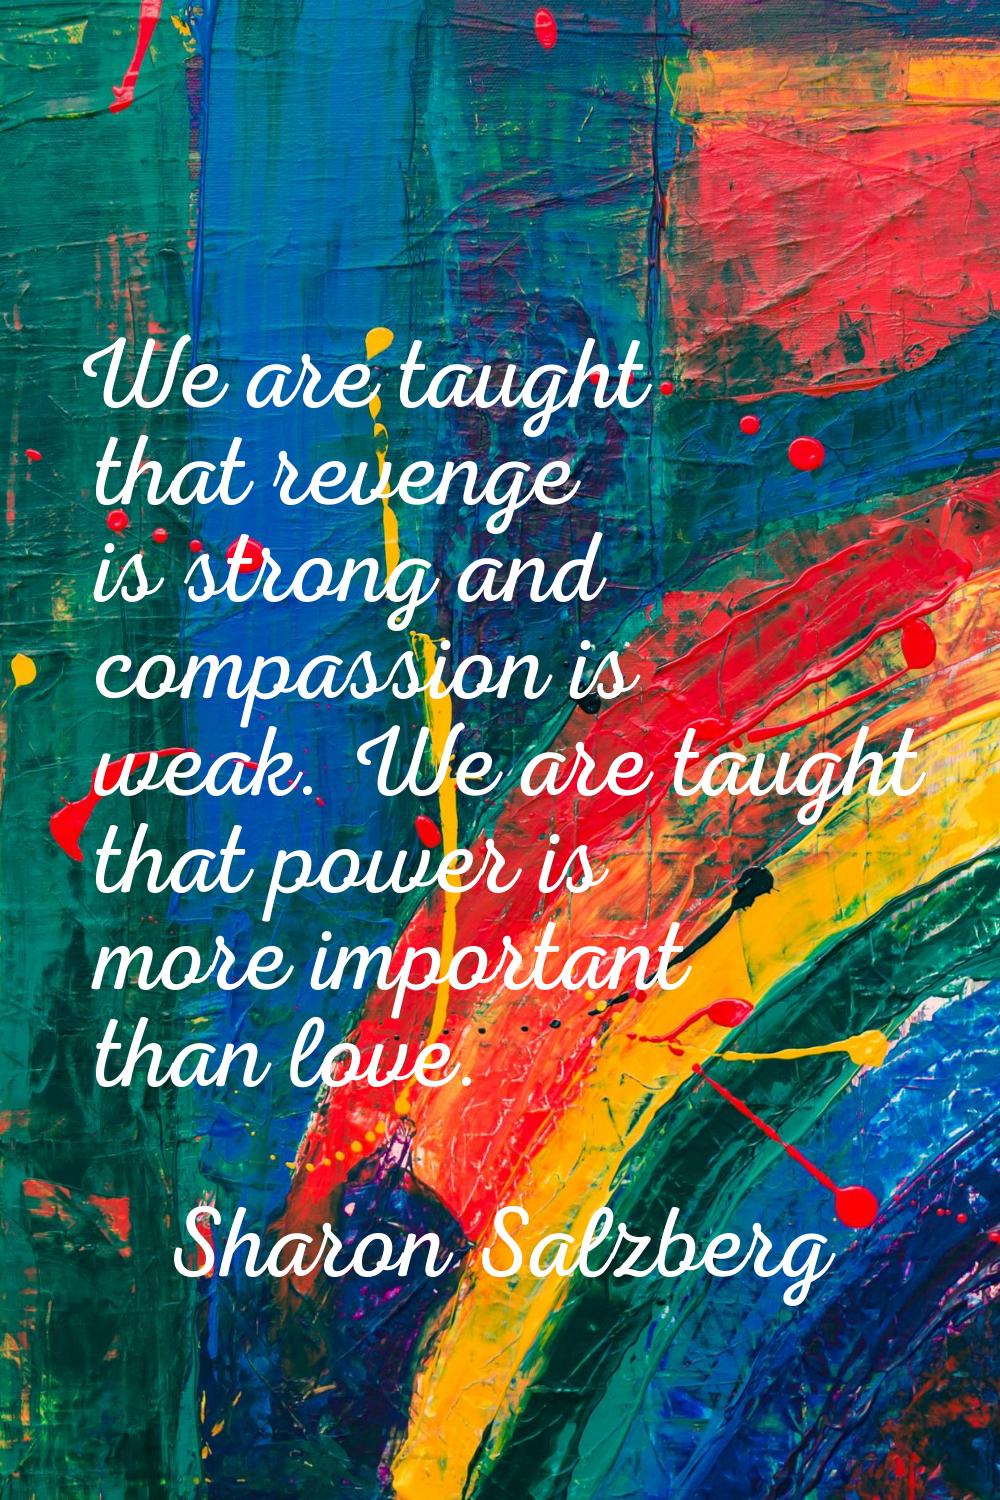 We are taught that revenge is strong and compassion is weak. We are taught that power is more impor